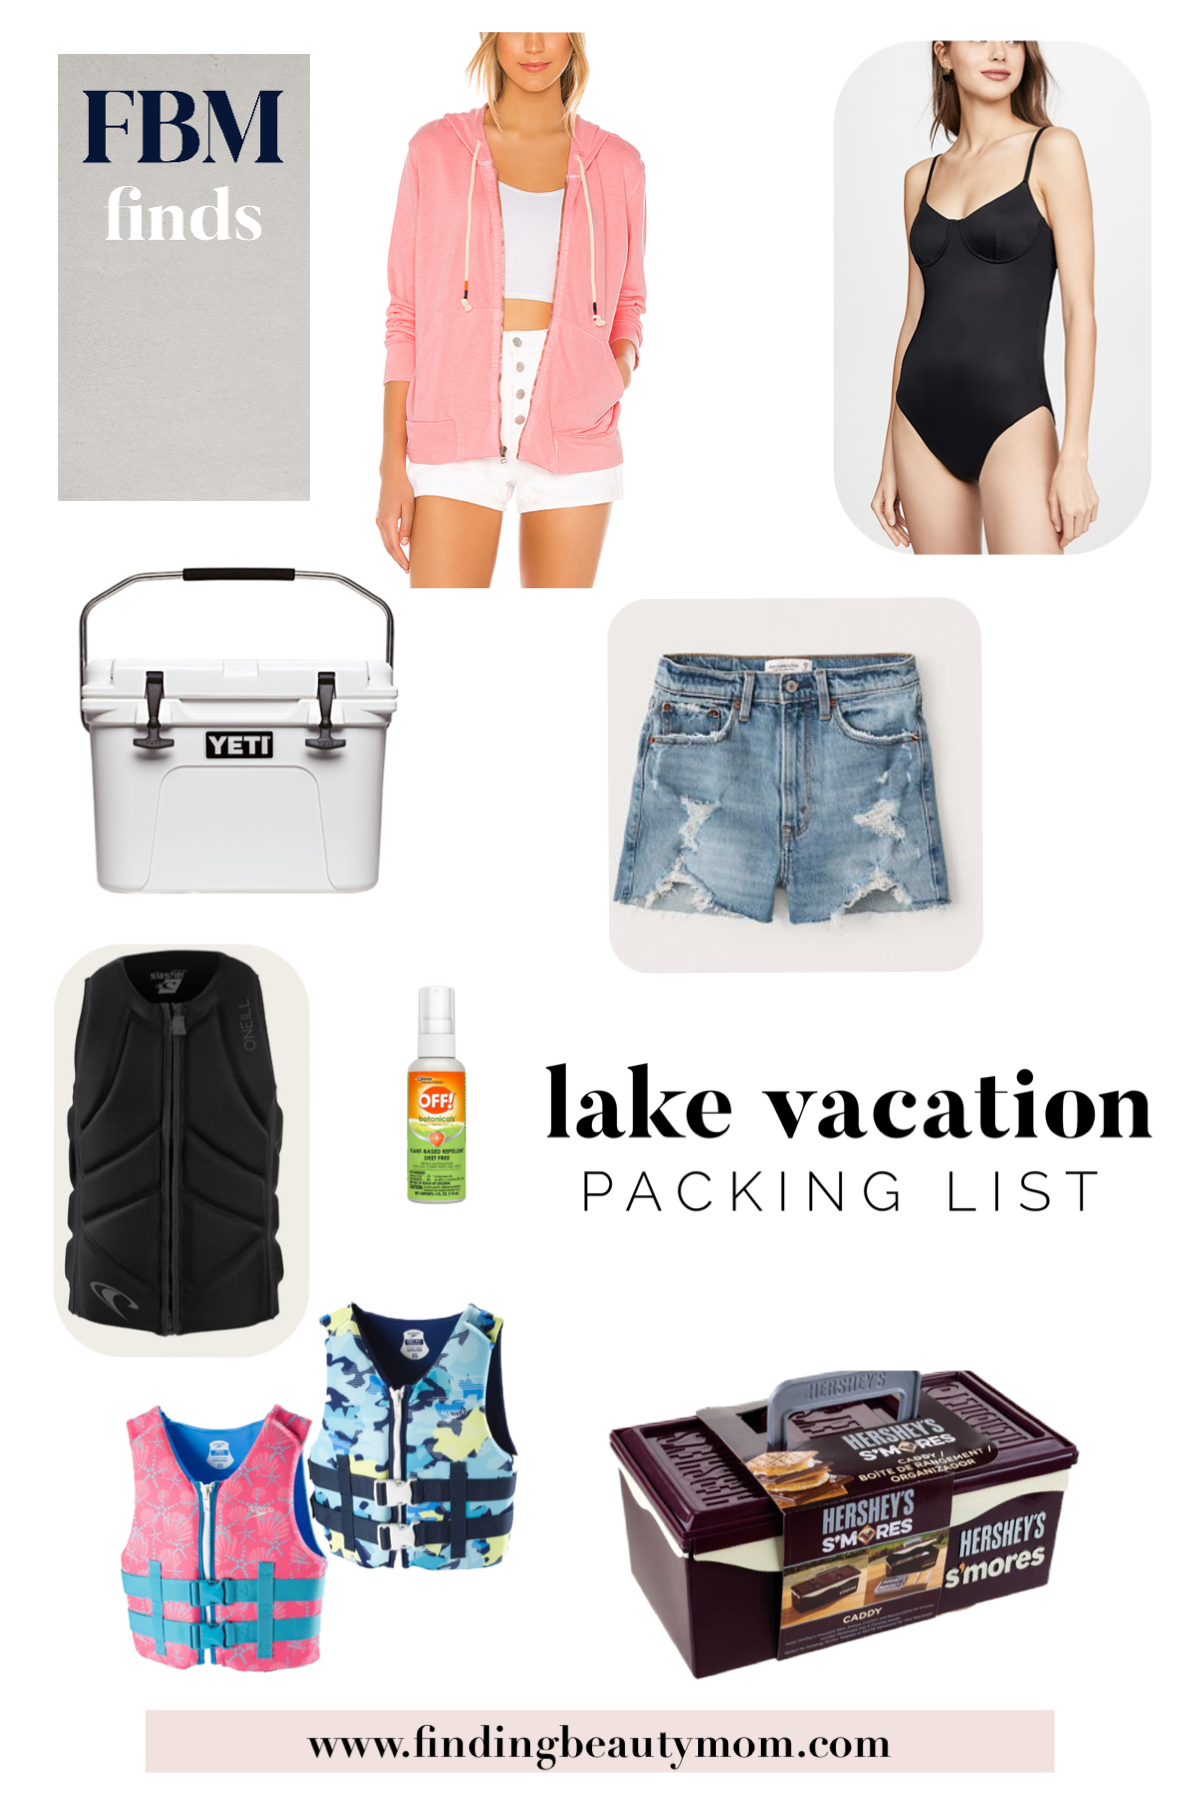 Lake vacation packing list